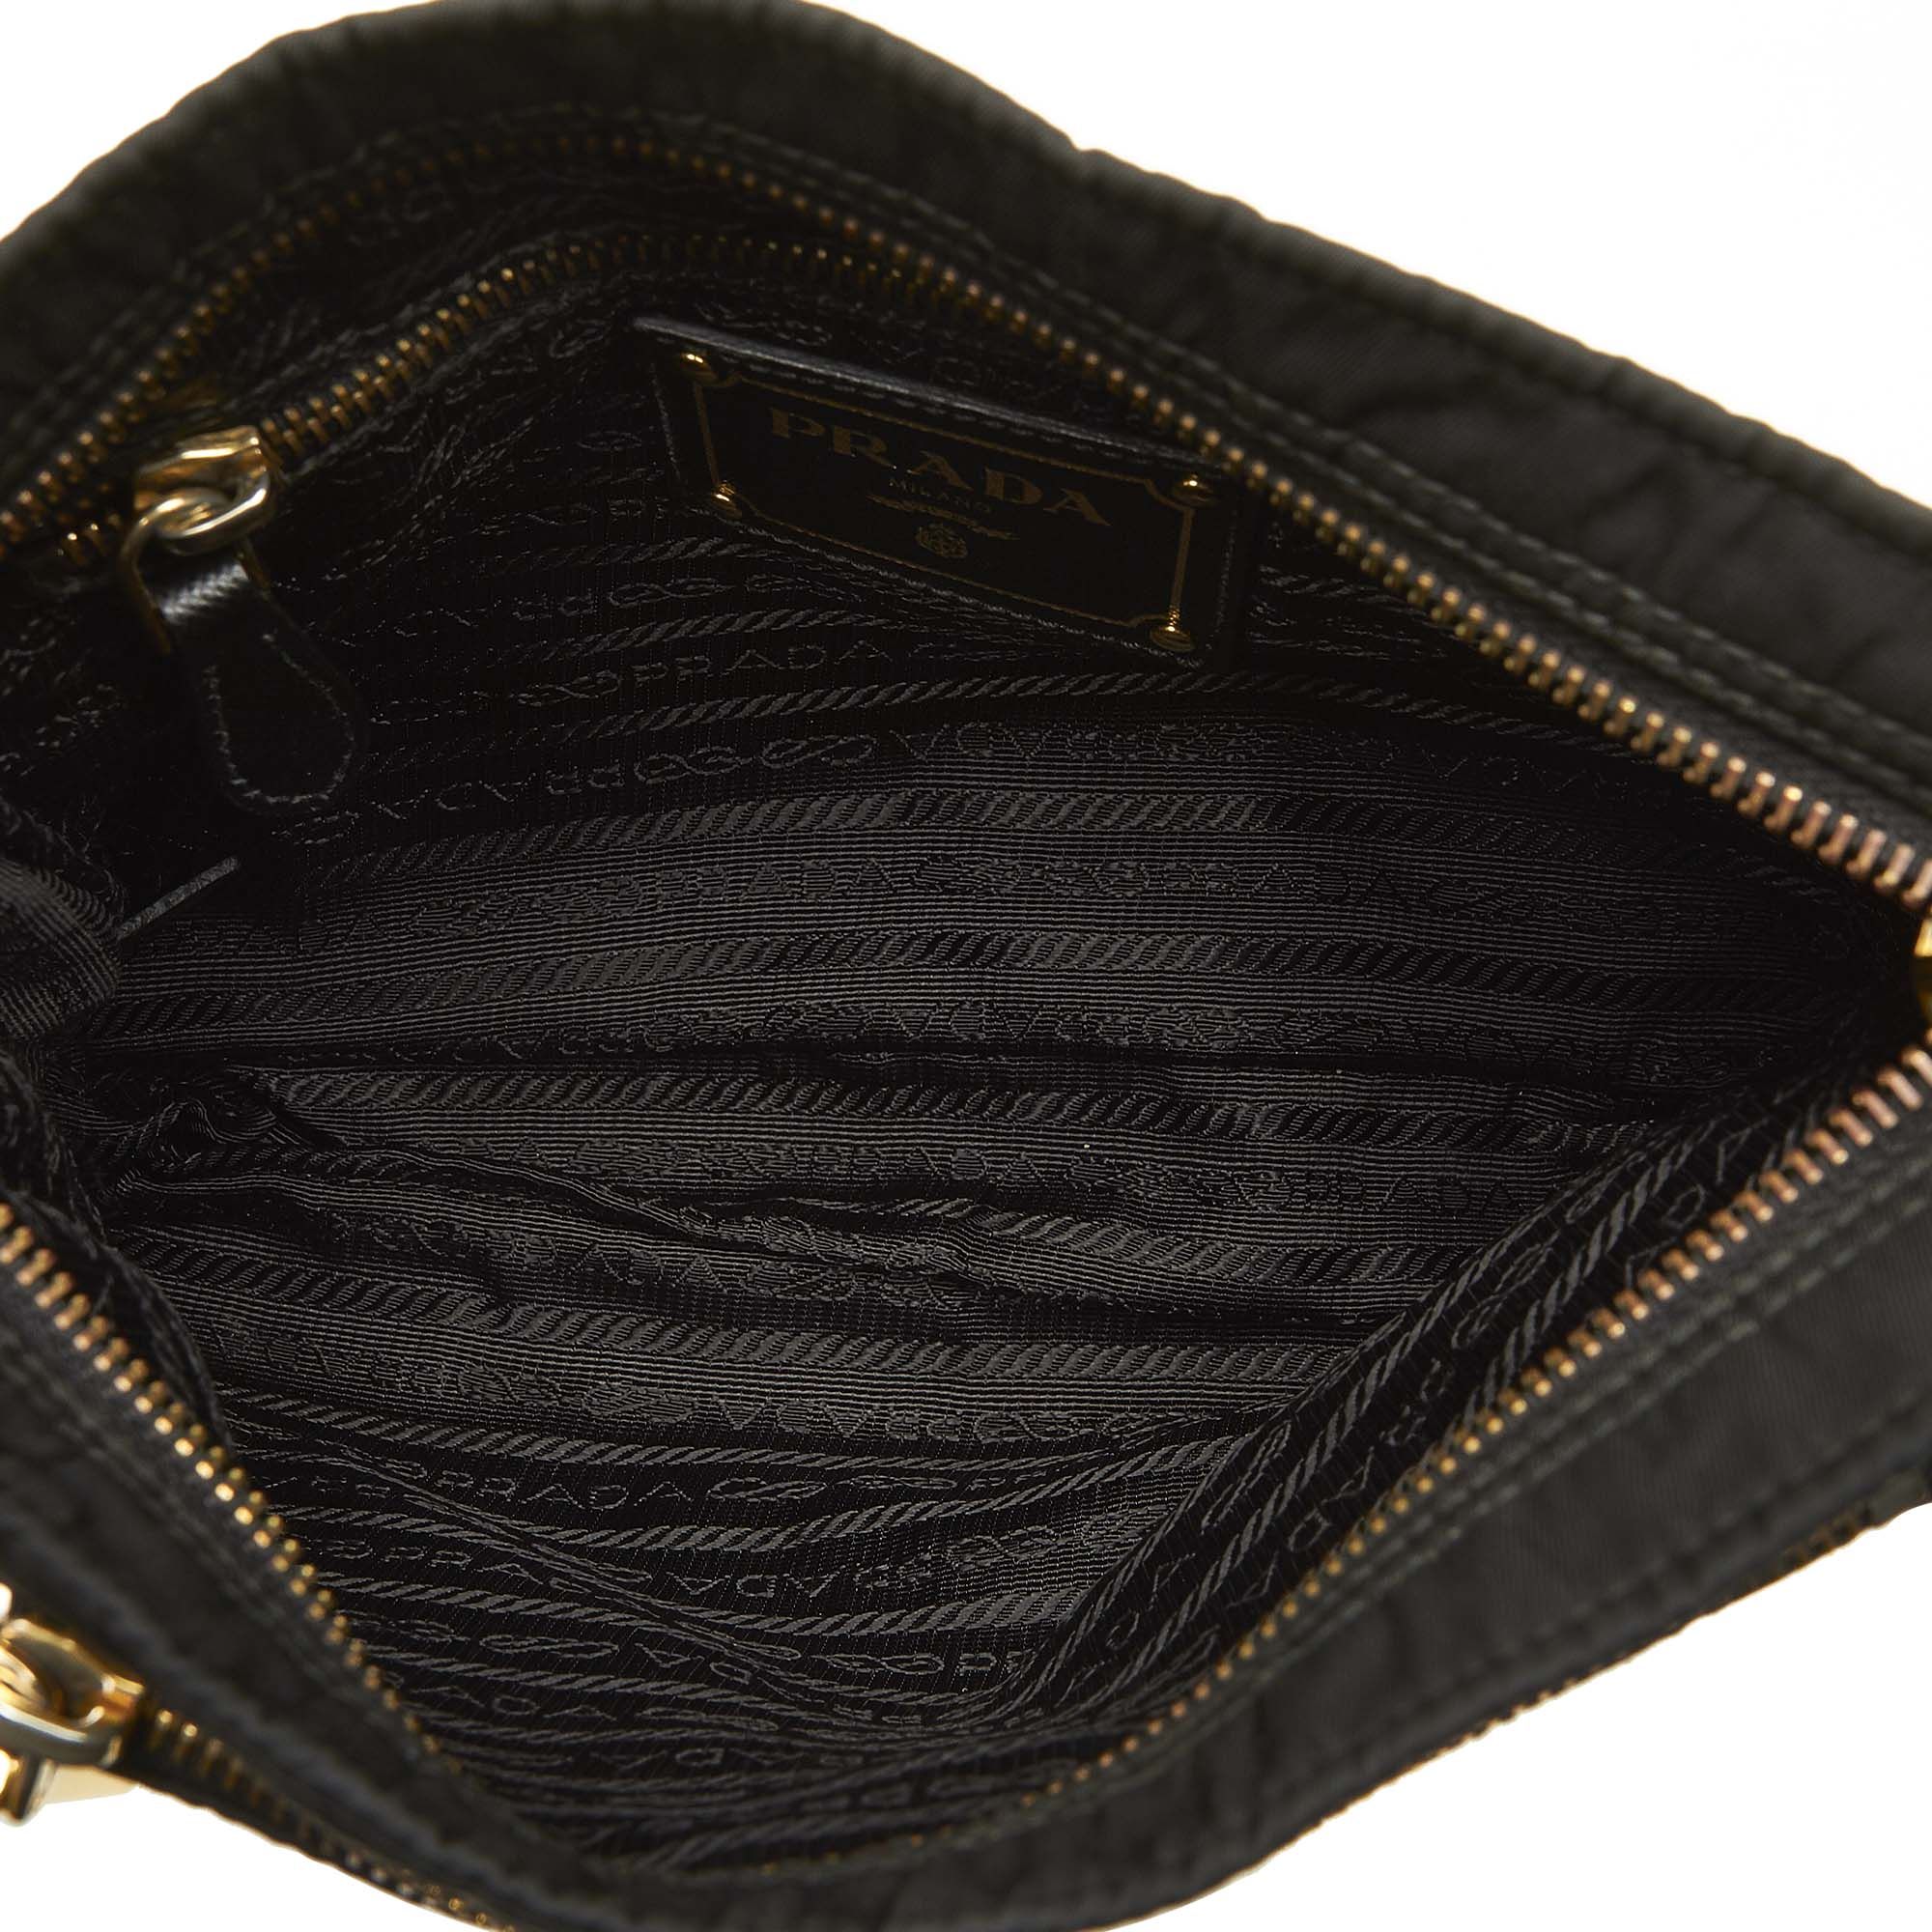 VINTAGE. RRP AS NEW. This crossbody bag features a nylon body, an exterior front zip pocket, a flat leather strap, a top zip closure, and an interior zip pocket.
Dimensions:
Length 20cm
Width 23cm
Depth 4cm
Shoulder Drop 55cm

Original Accessories: Authenticity Card

Serial Number: BT0693
Color: Black
Material: Fabric x Nylon
Country of Origin: Italy
Boutique Reference: SSU95257K1342


Product Rating: GoodCondition